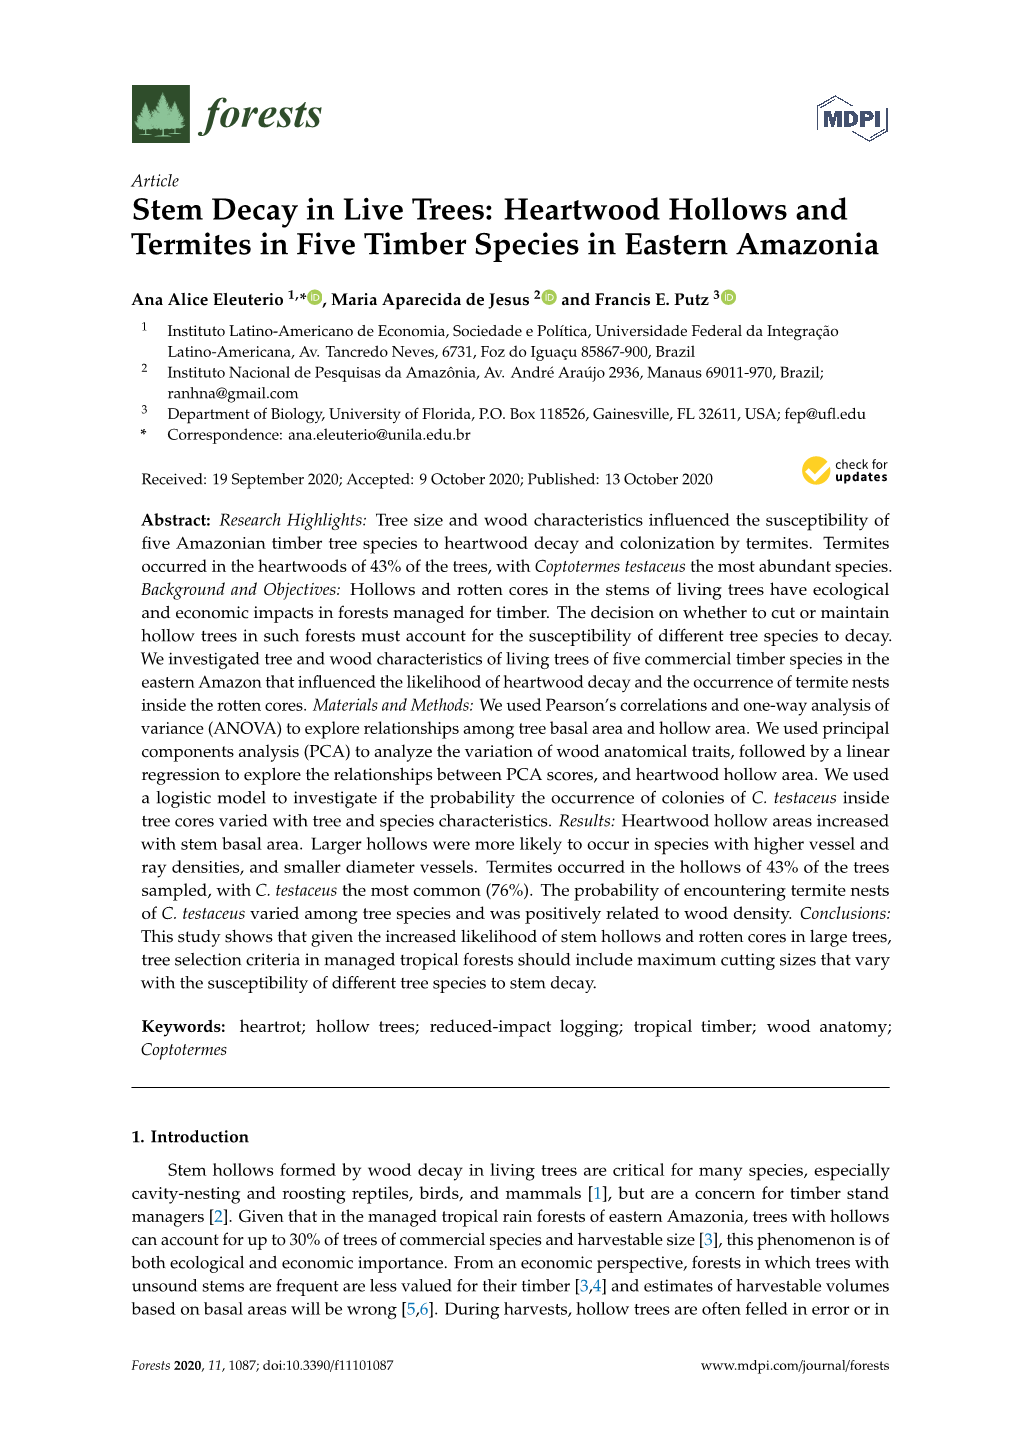 Stem Decay in Live Trees: Heartwood Hollows and Termites in Five Timber Species in Eastern Amazonia